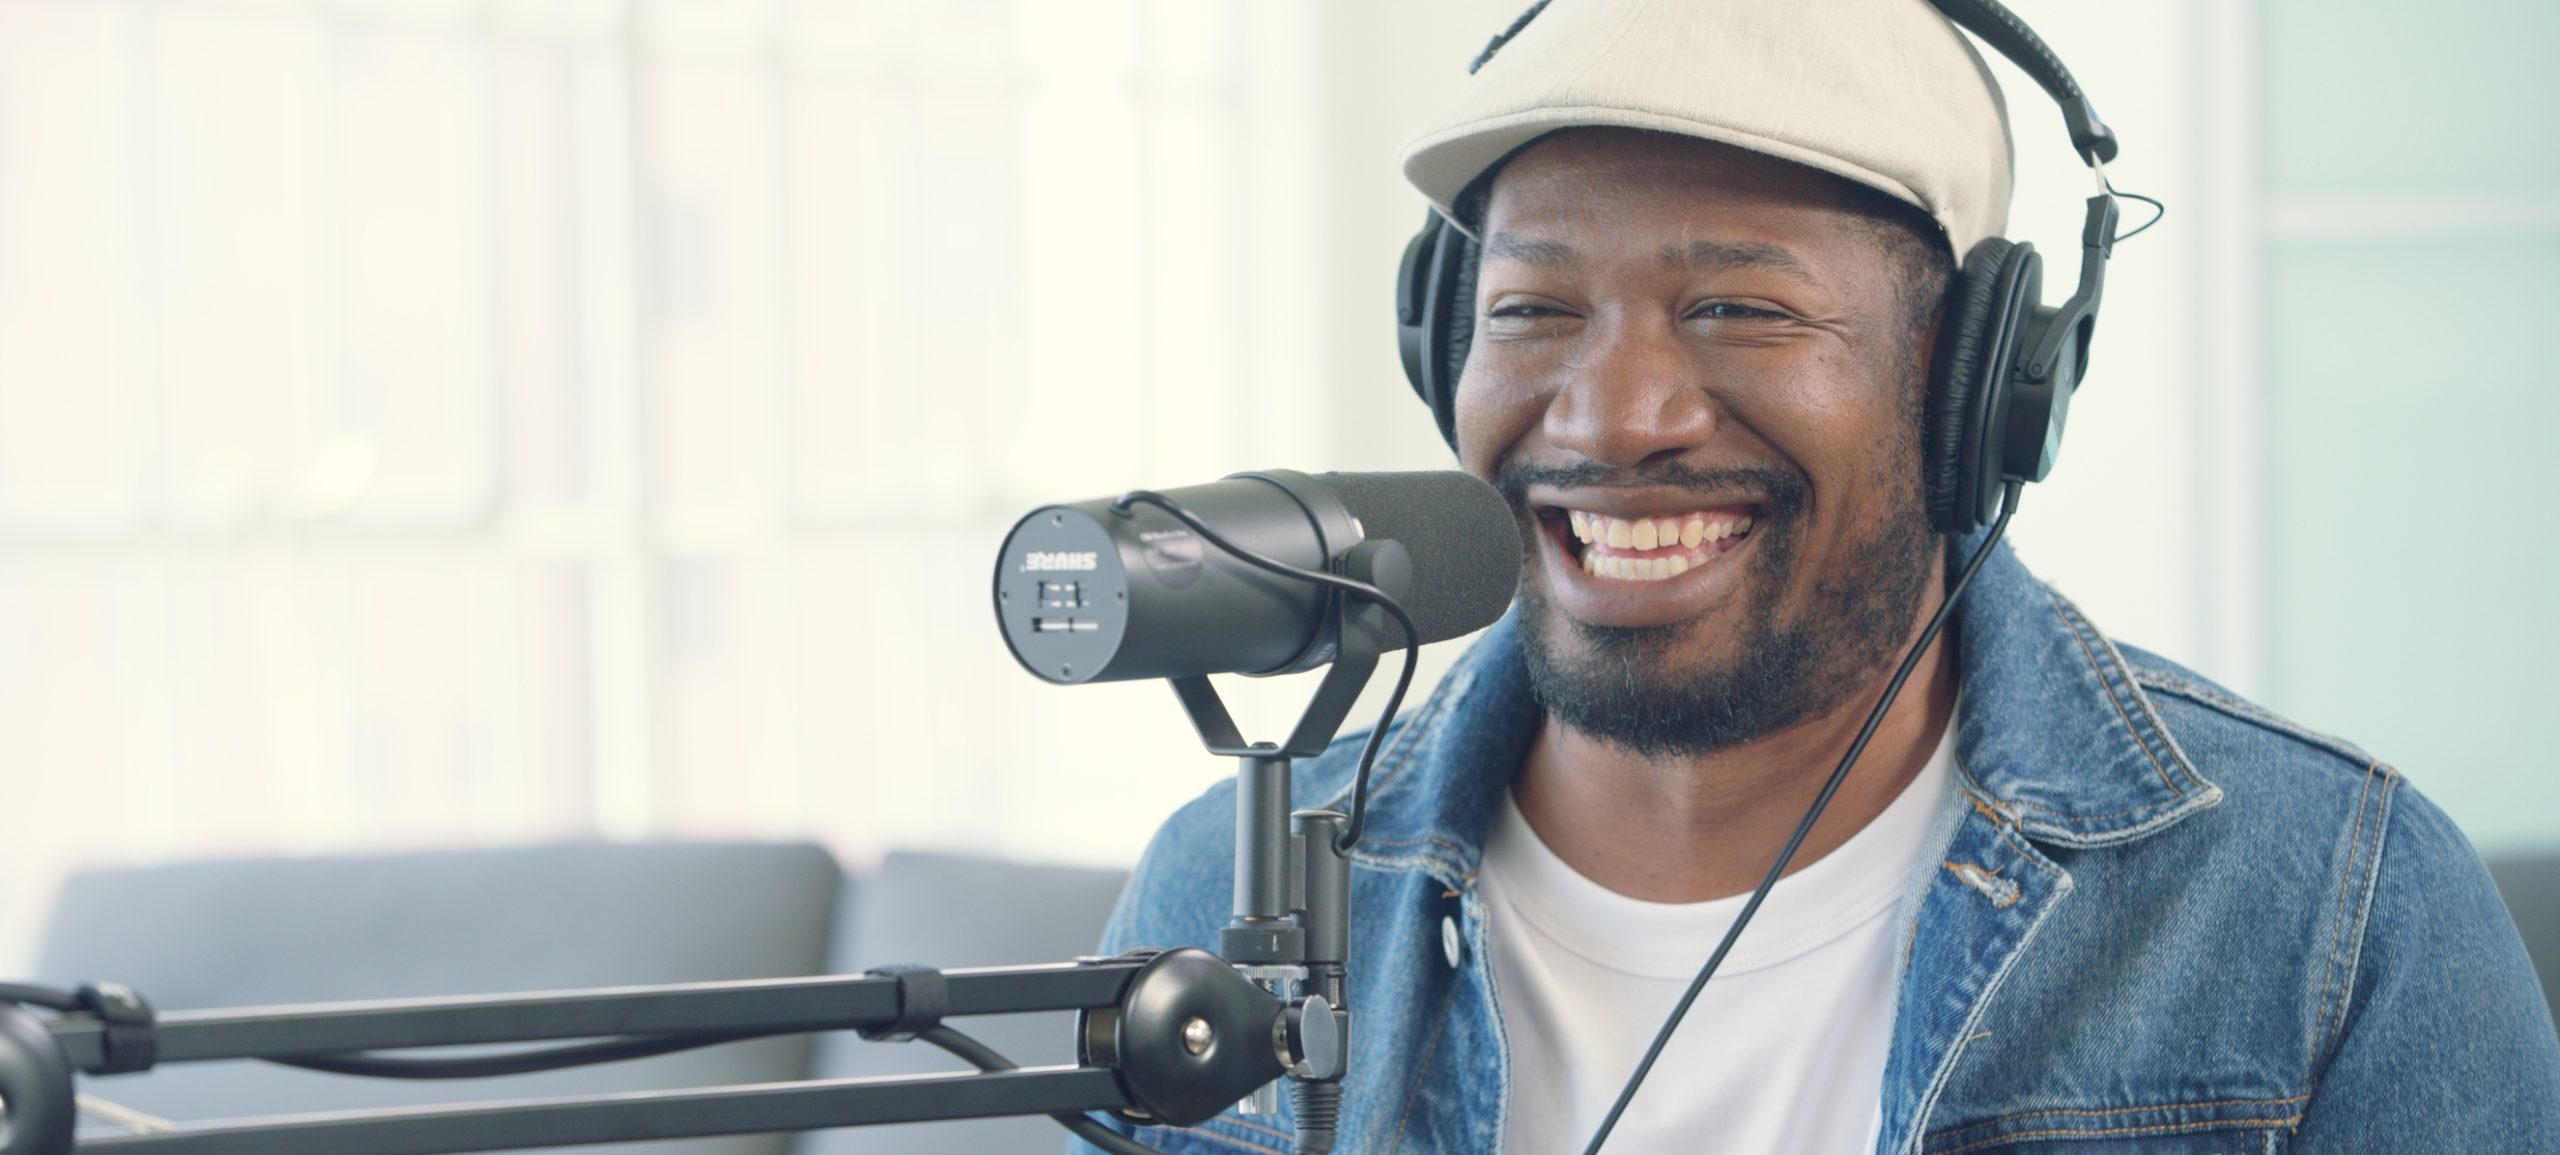 Uncreative Radio in L.A. Episode 109 Pavvlo Zengo African American man with a beard wearing headphones and a blue jean jacket smiling and talking in a microphone